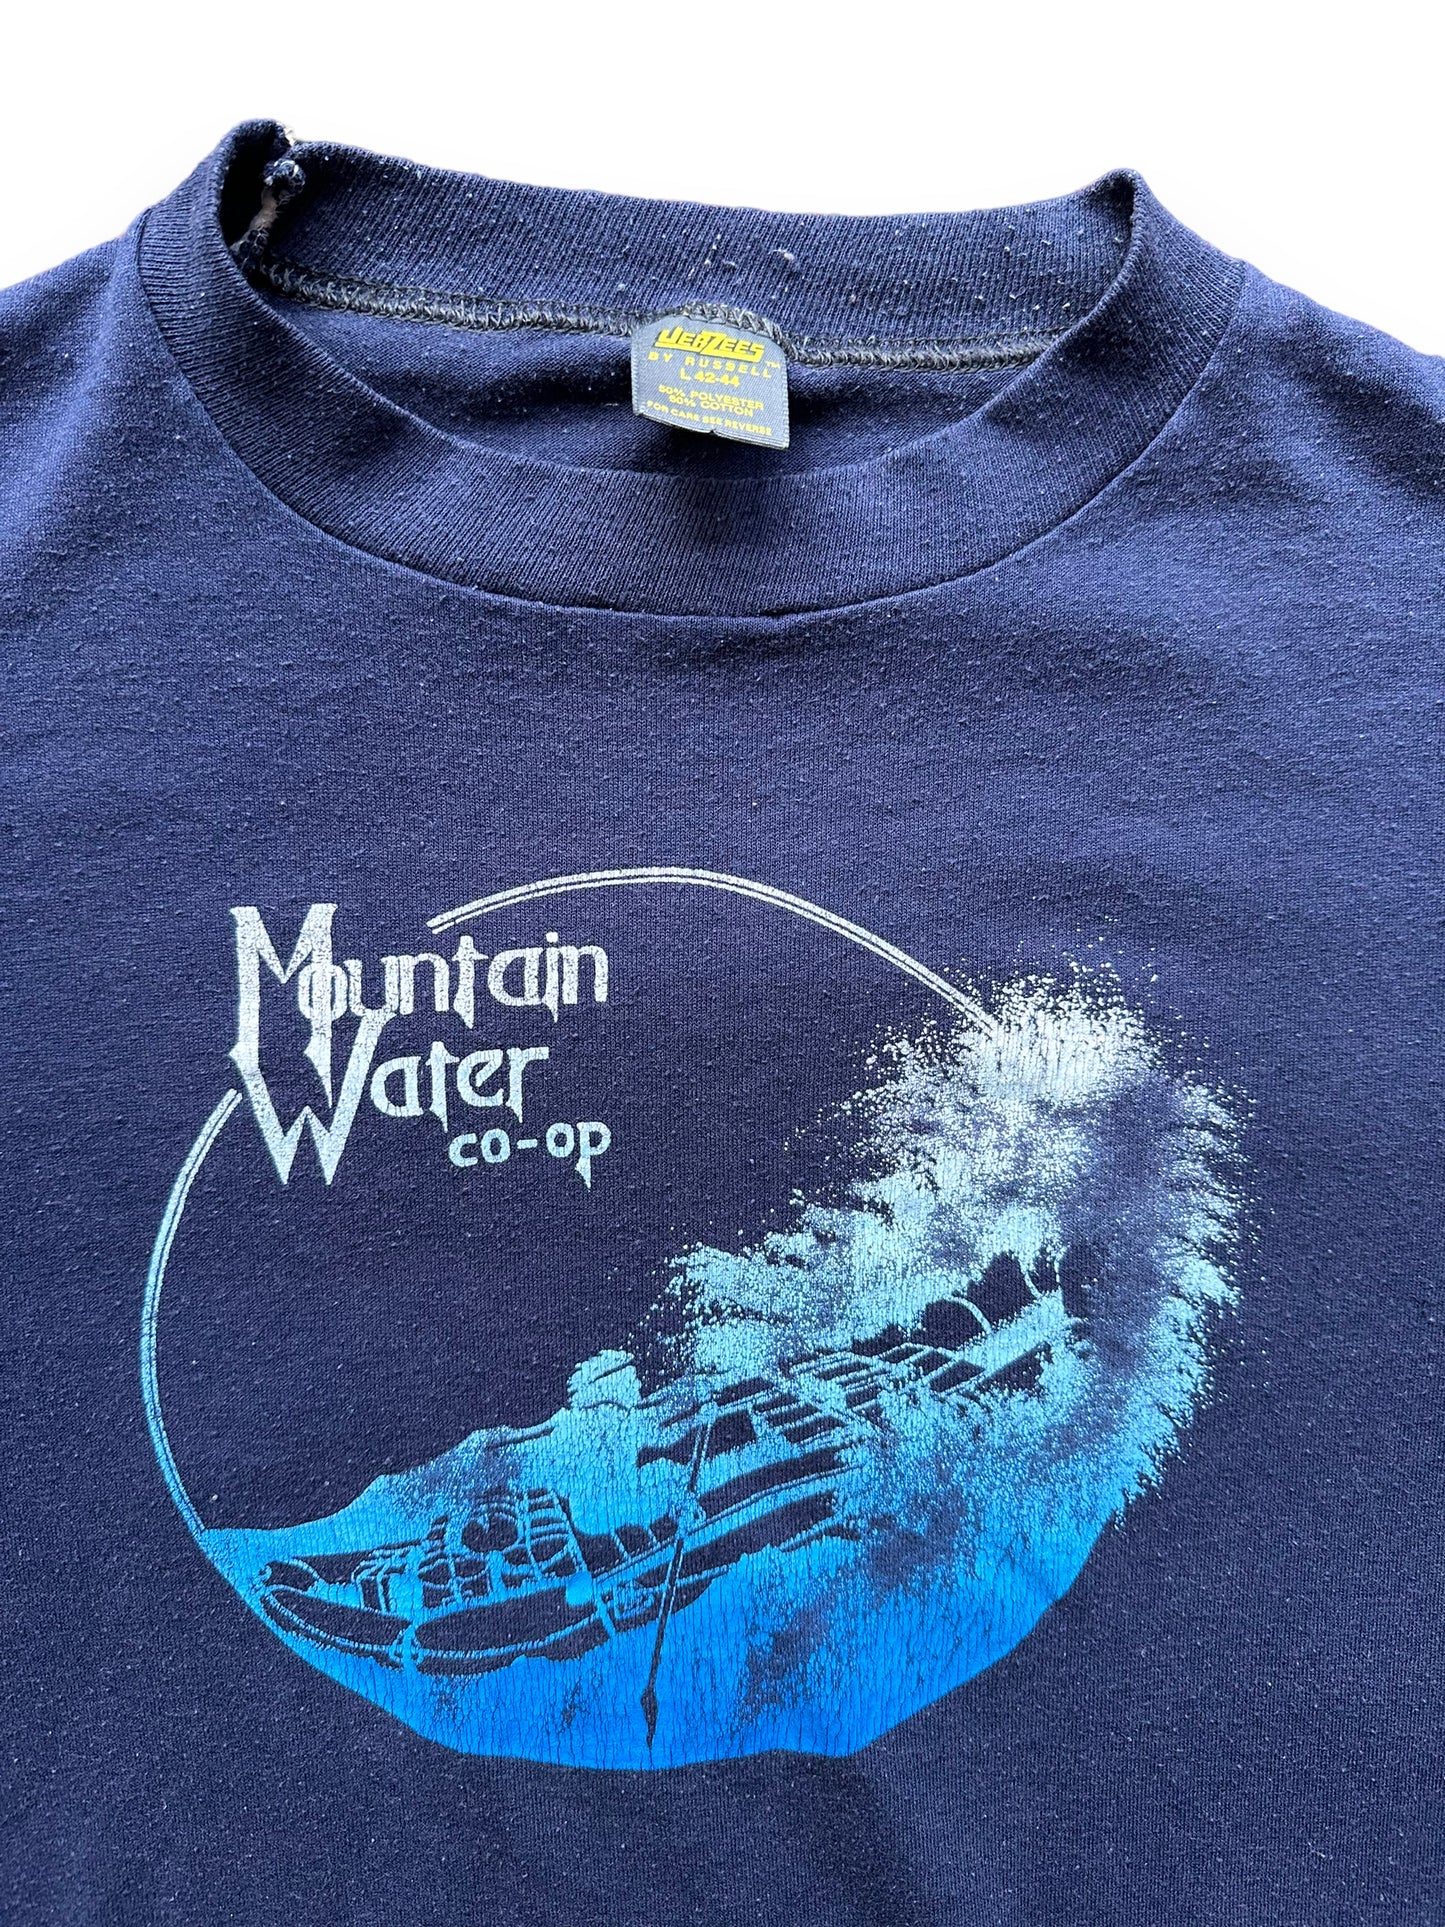 – Vintage T-Shirts | Barn Water Owl Seatt Vintage Co-op Tee Mountain The Graphic SZ L